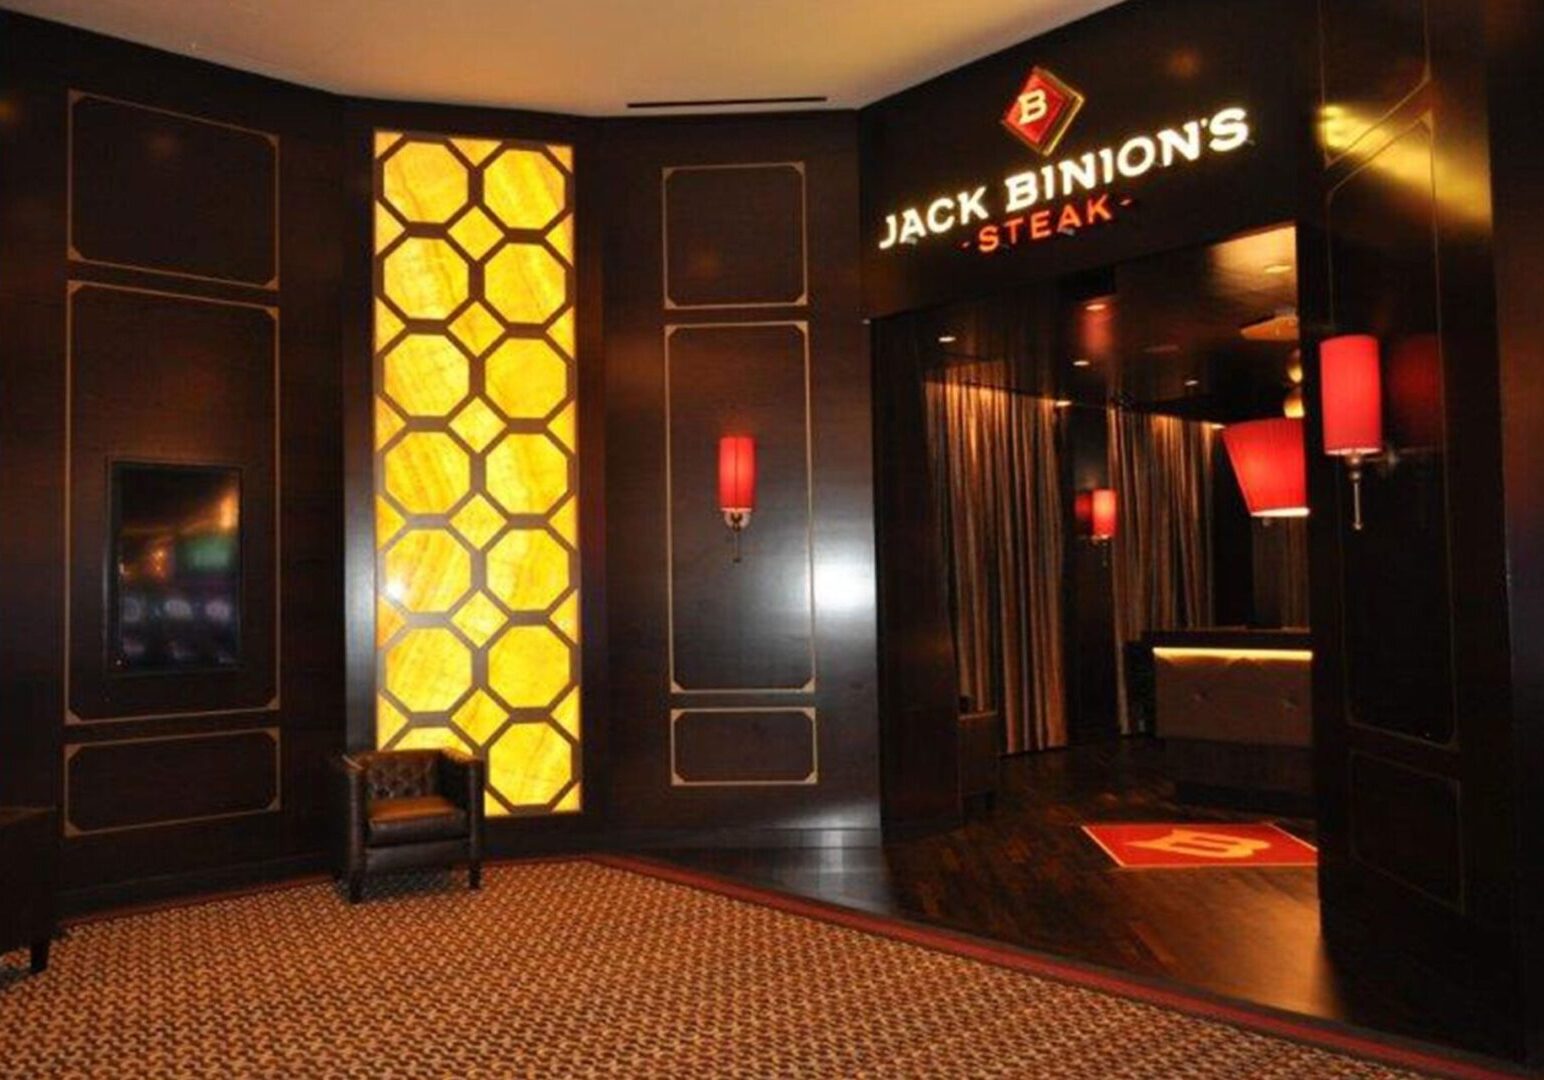 A room with a chair and a sign for jack binion 's steak.